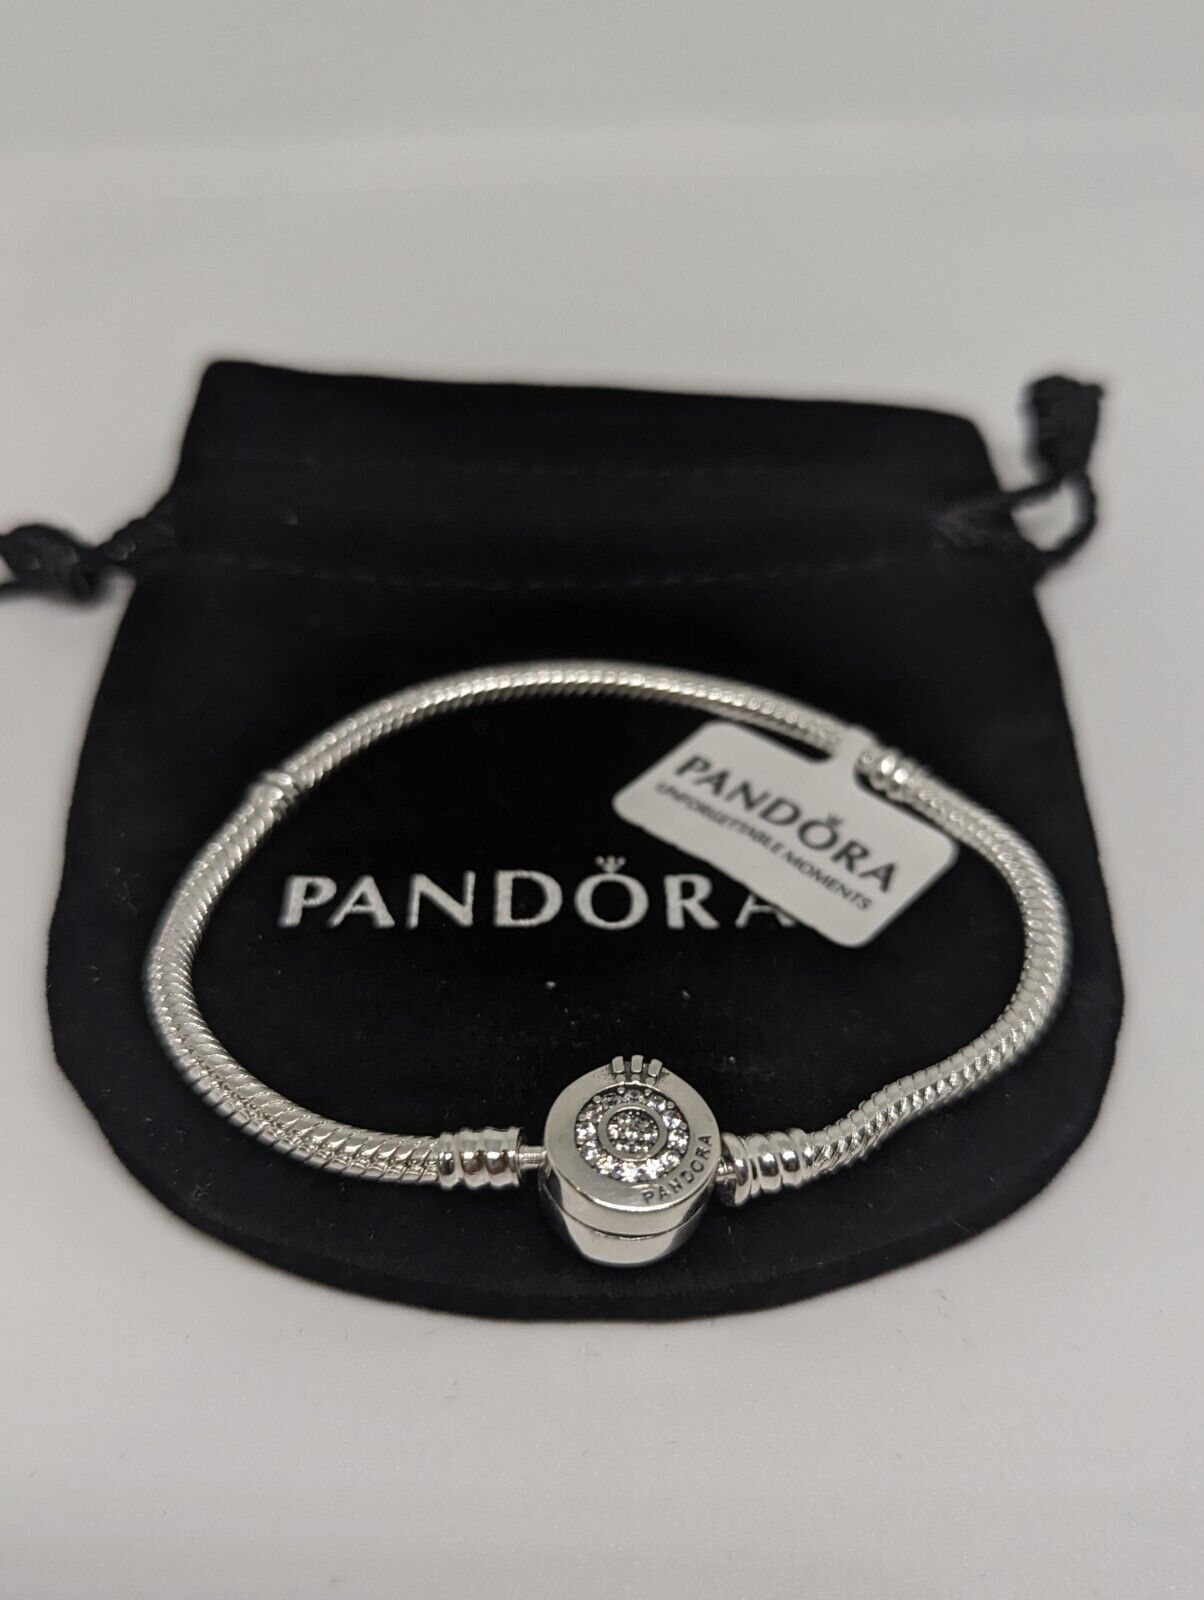 New Pandora Moments Crown Claps Snake Chain Bracelet Size 7.1 Inches